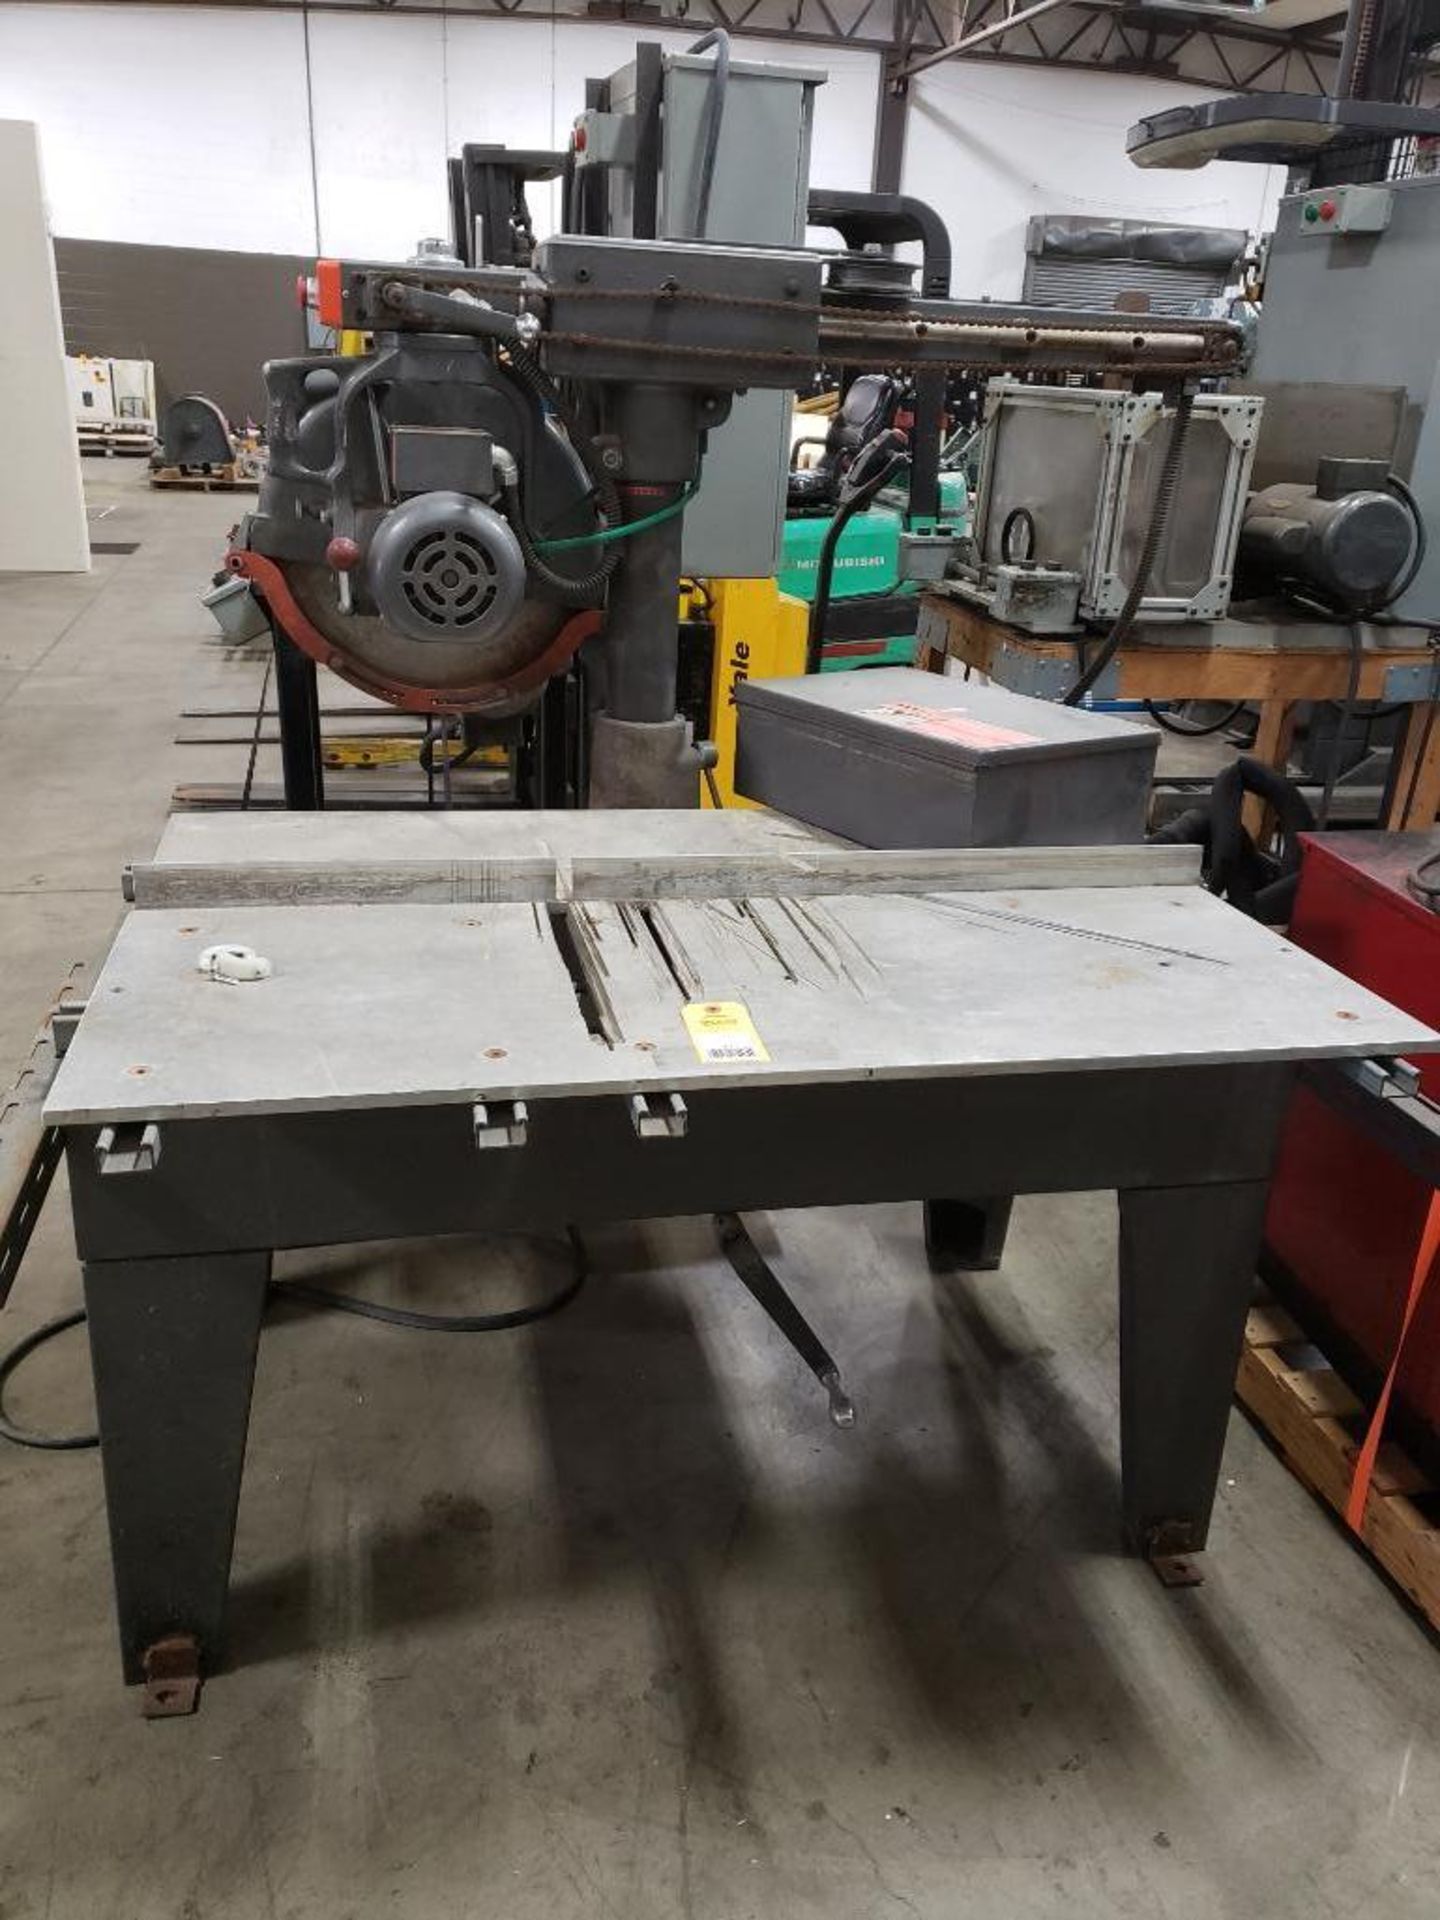 Tops retracto-saw radial arm saw. 3 phase, 460v.